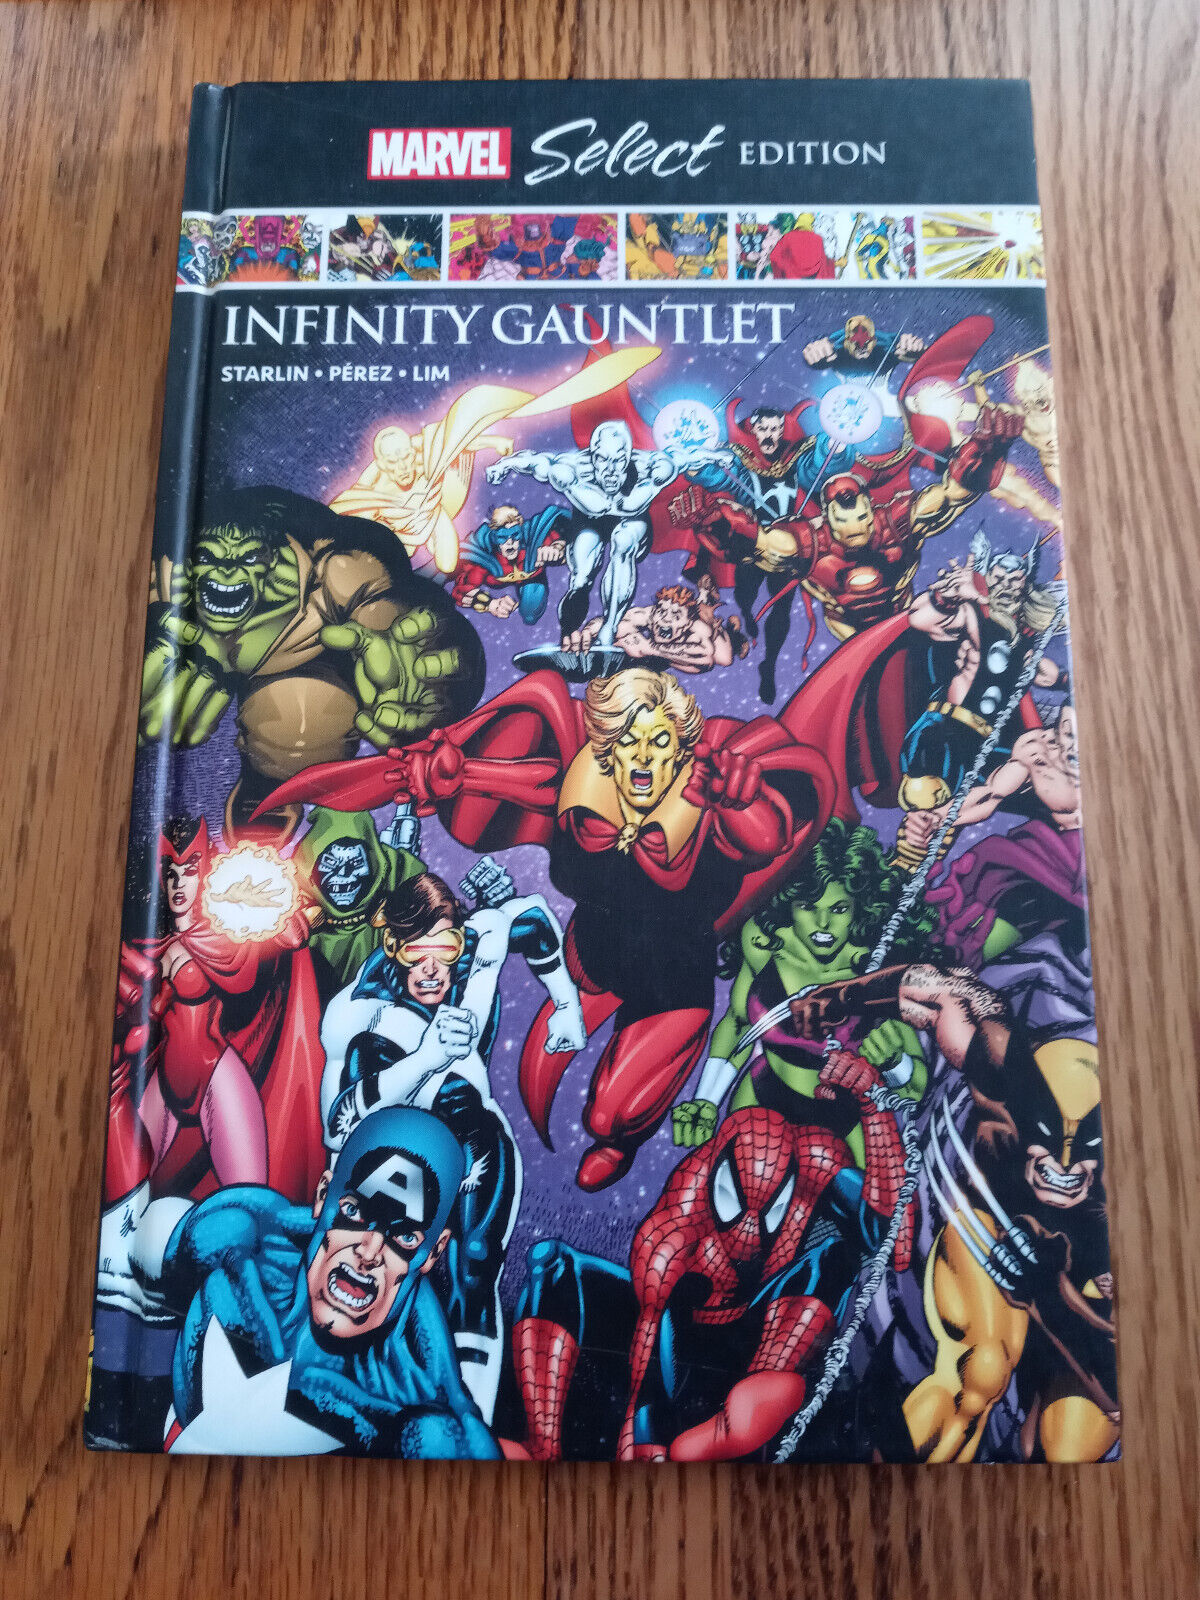 Marvel Select Infinity Gauntlet by Jim Starlin (Hardcover, 2020)